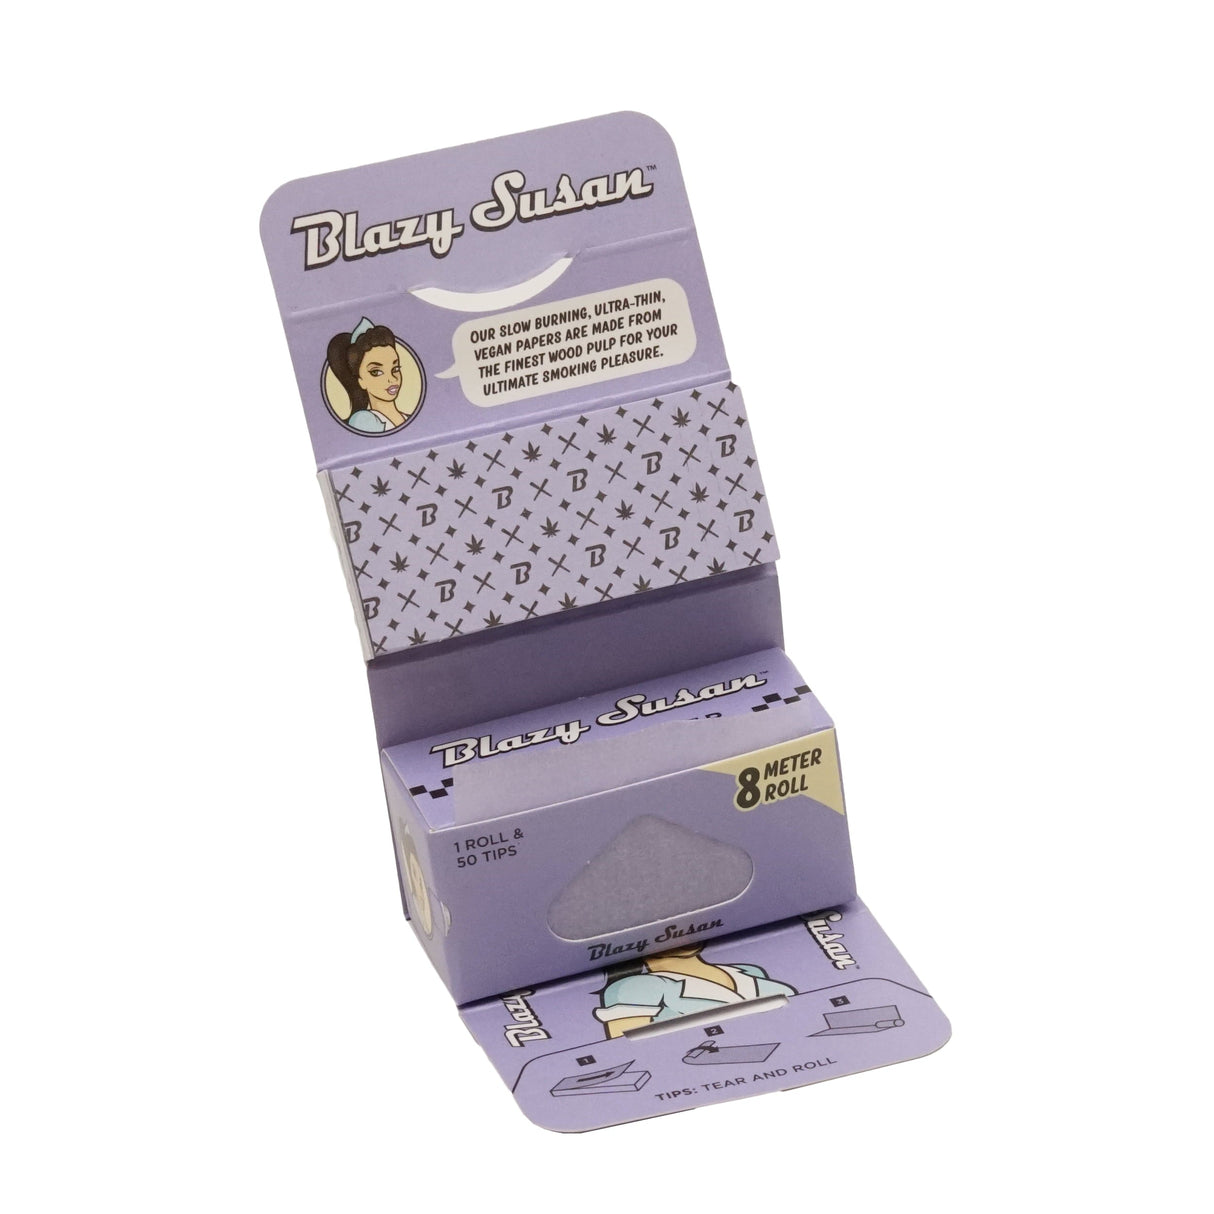 Blazy Susan Purple Rolling Papers pack open to display contents on white background